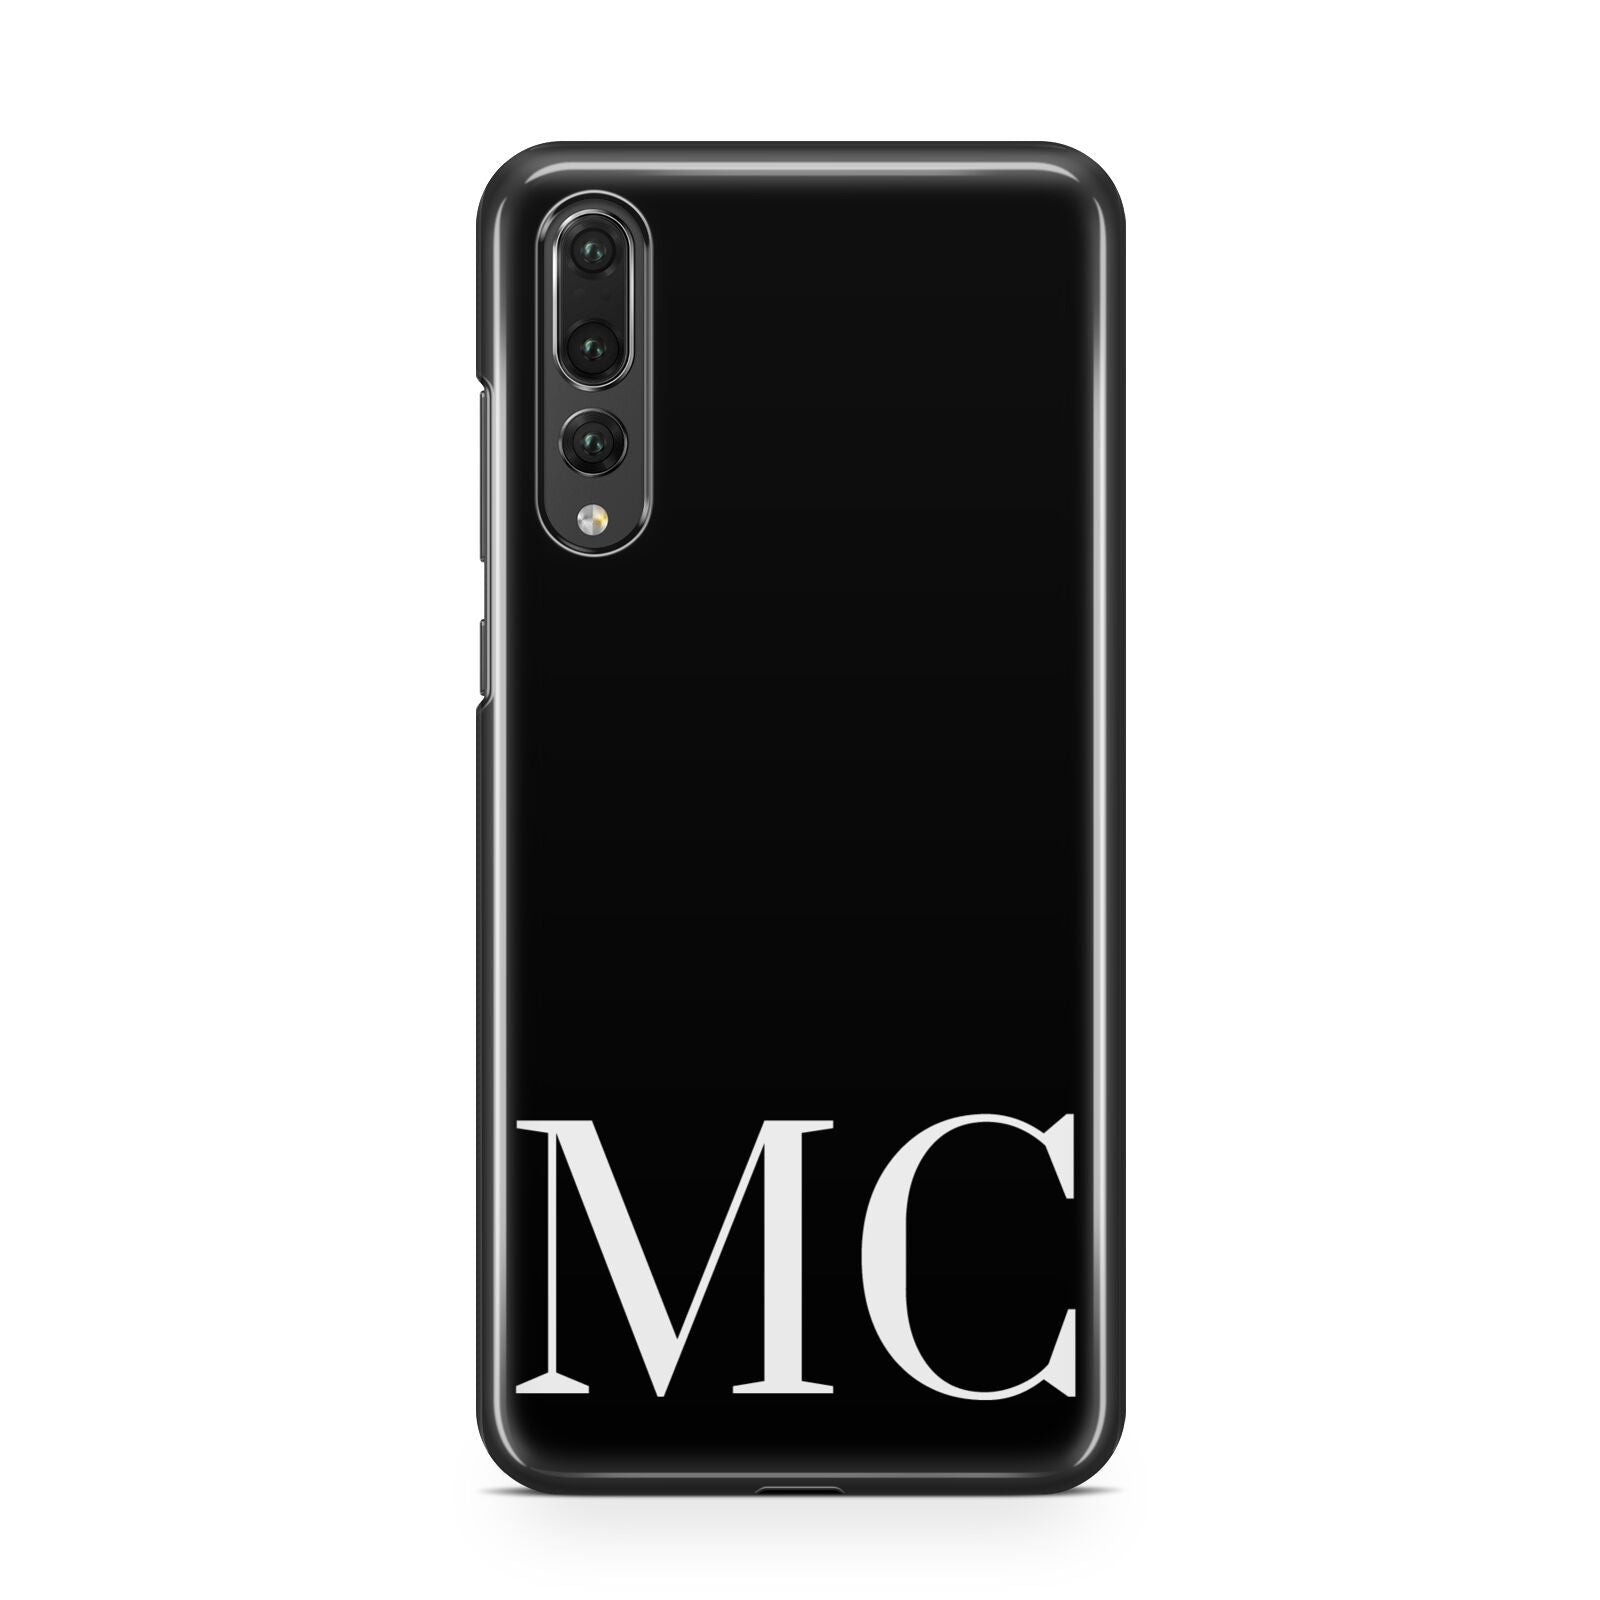 Initials Personalised 1 Huawei P20 Pro Phone Case